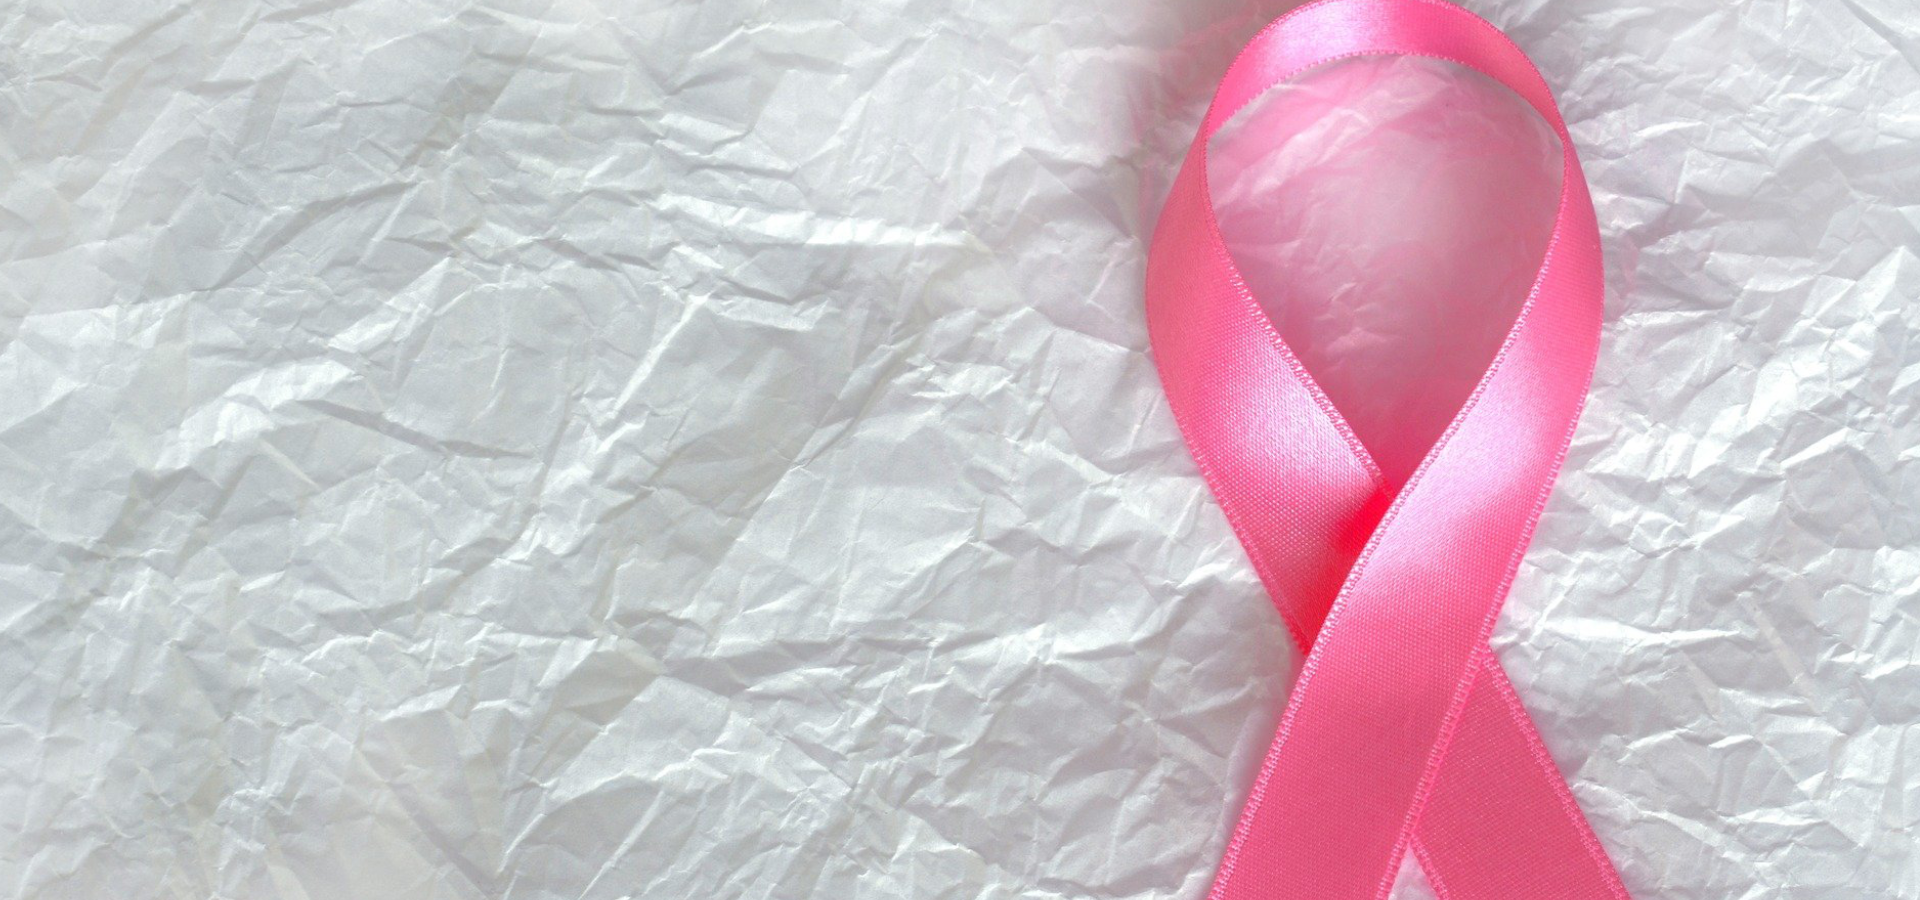 Two thirds of women diagnosed with breast cancer remain employed